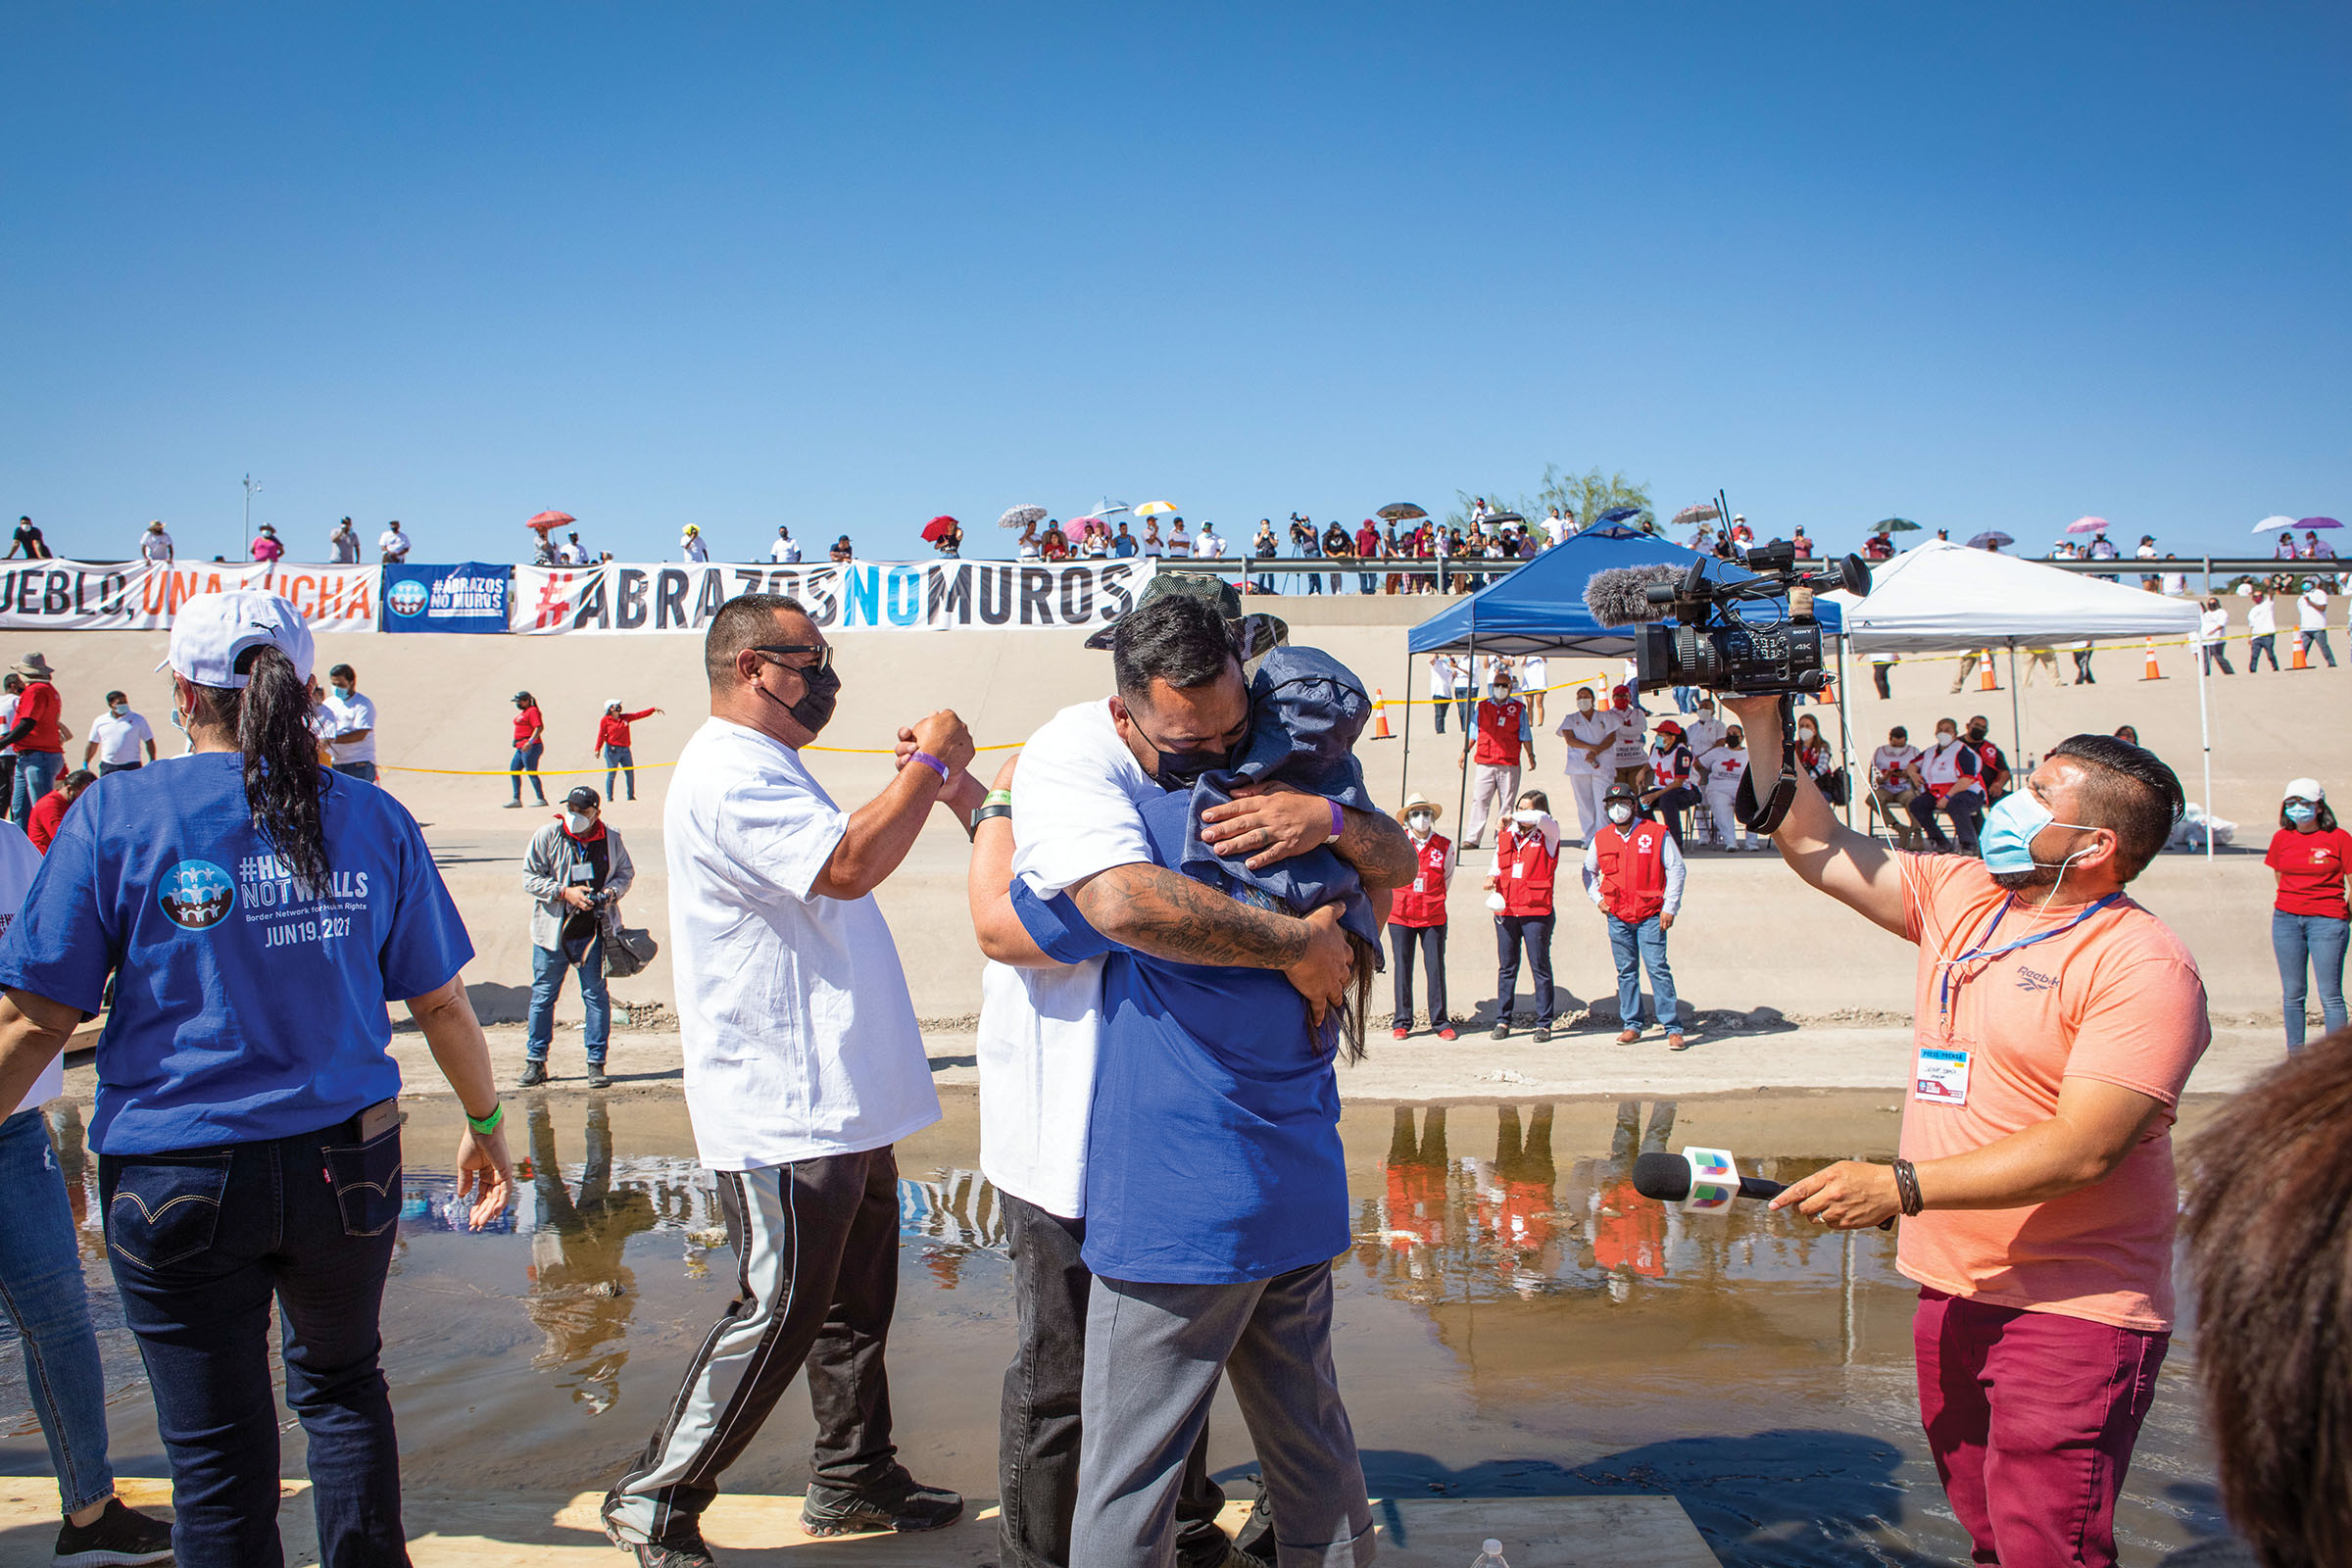 Two people embrace while others move around in the background offering fist bumps under blue sky along the Rio Grande